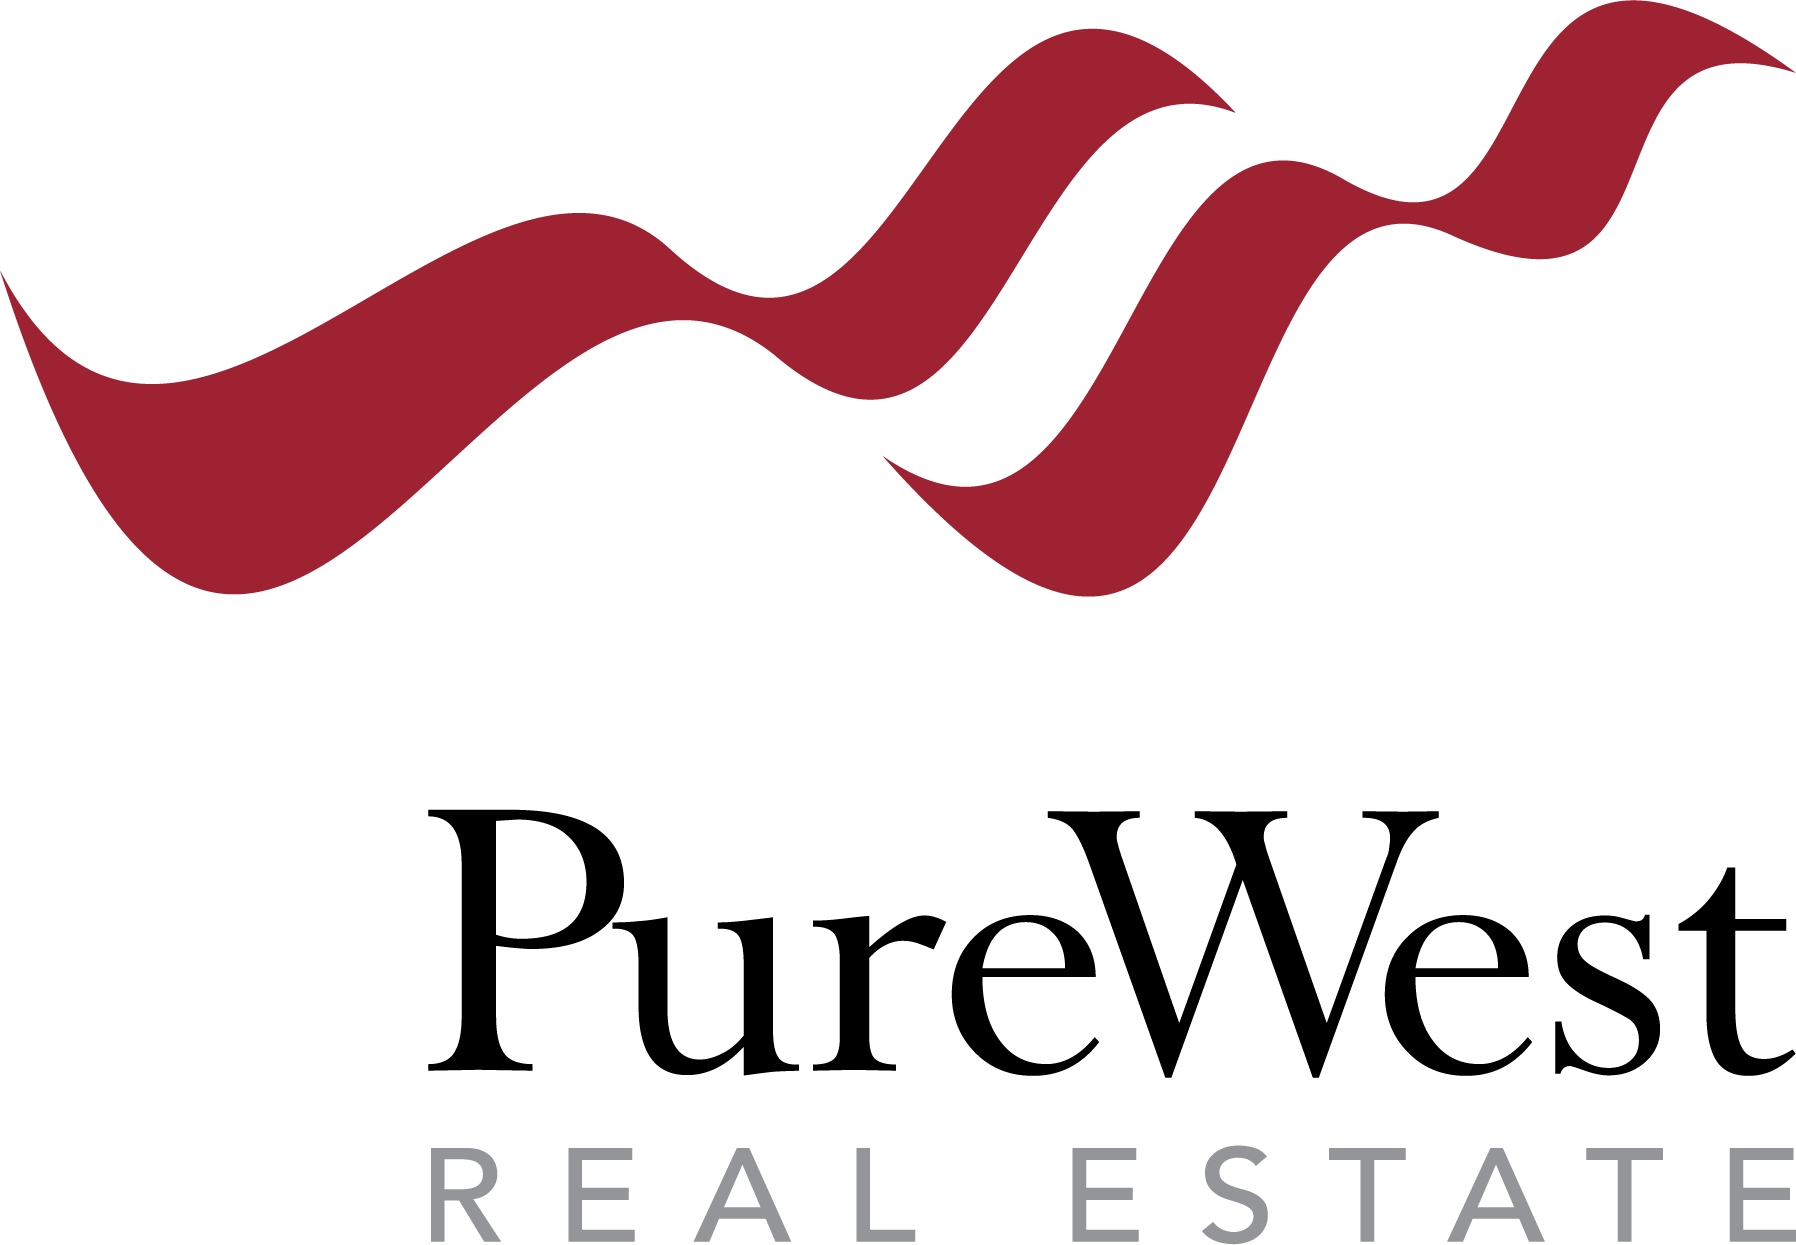 Jeffry Swenson - Pure West Real Estate Logo